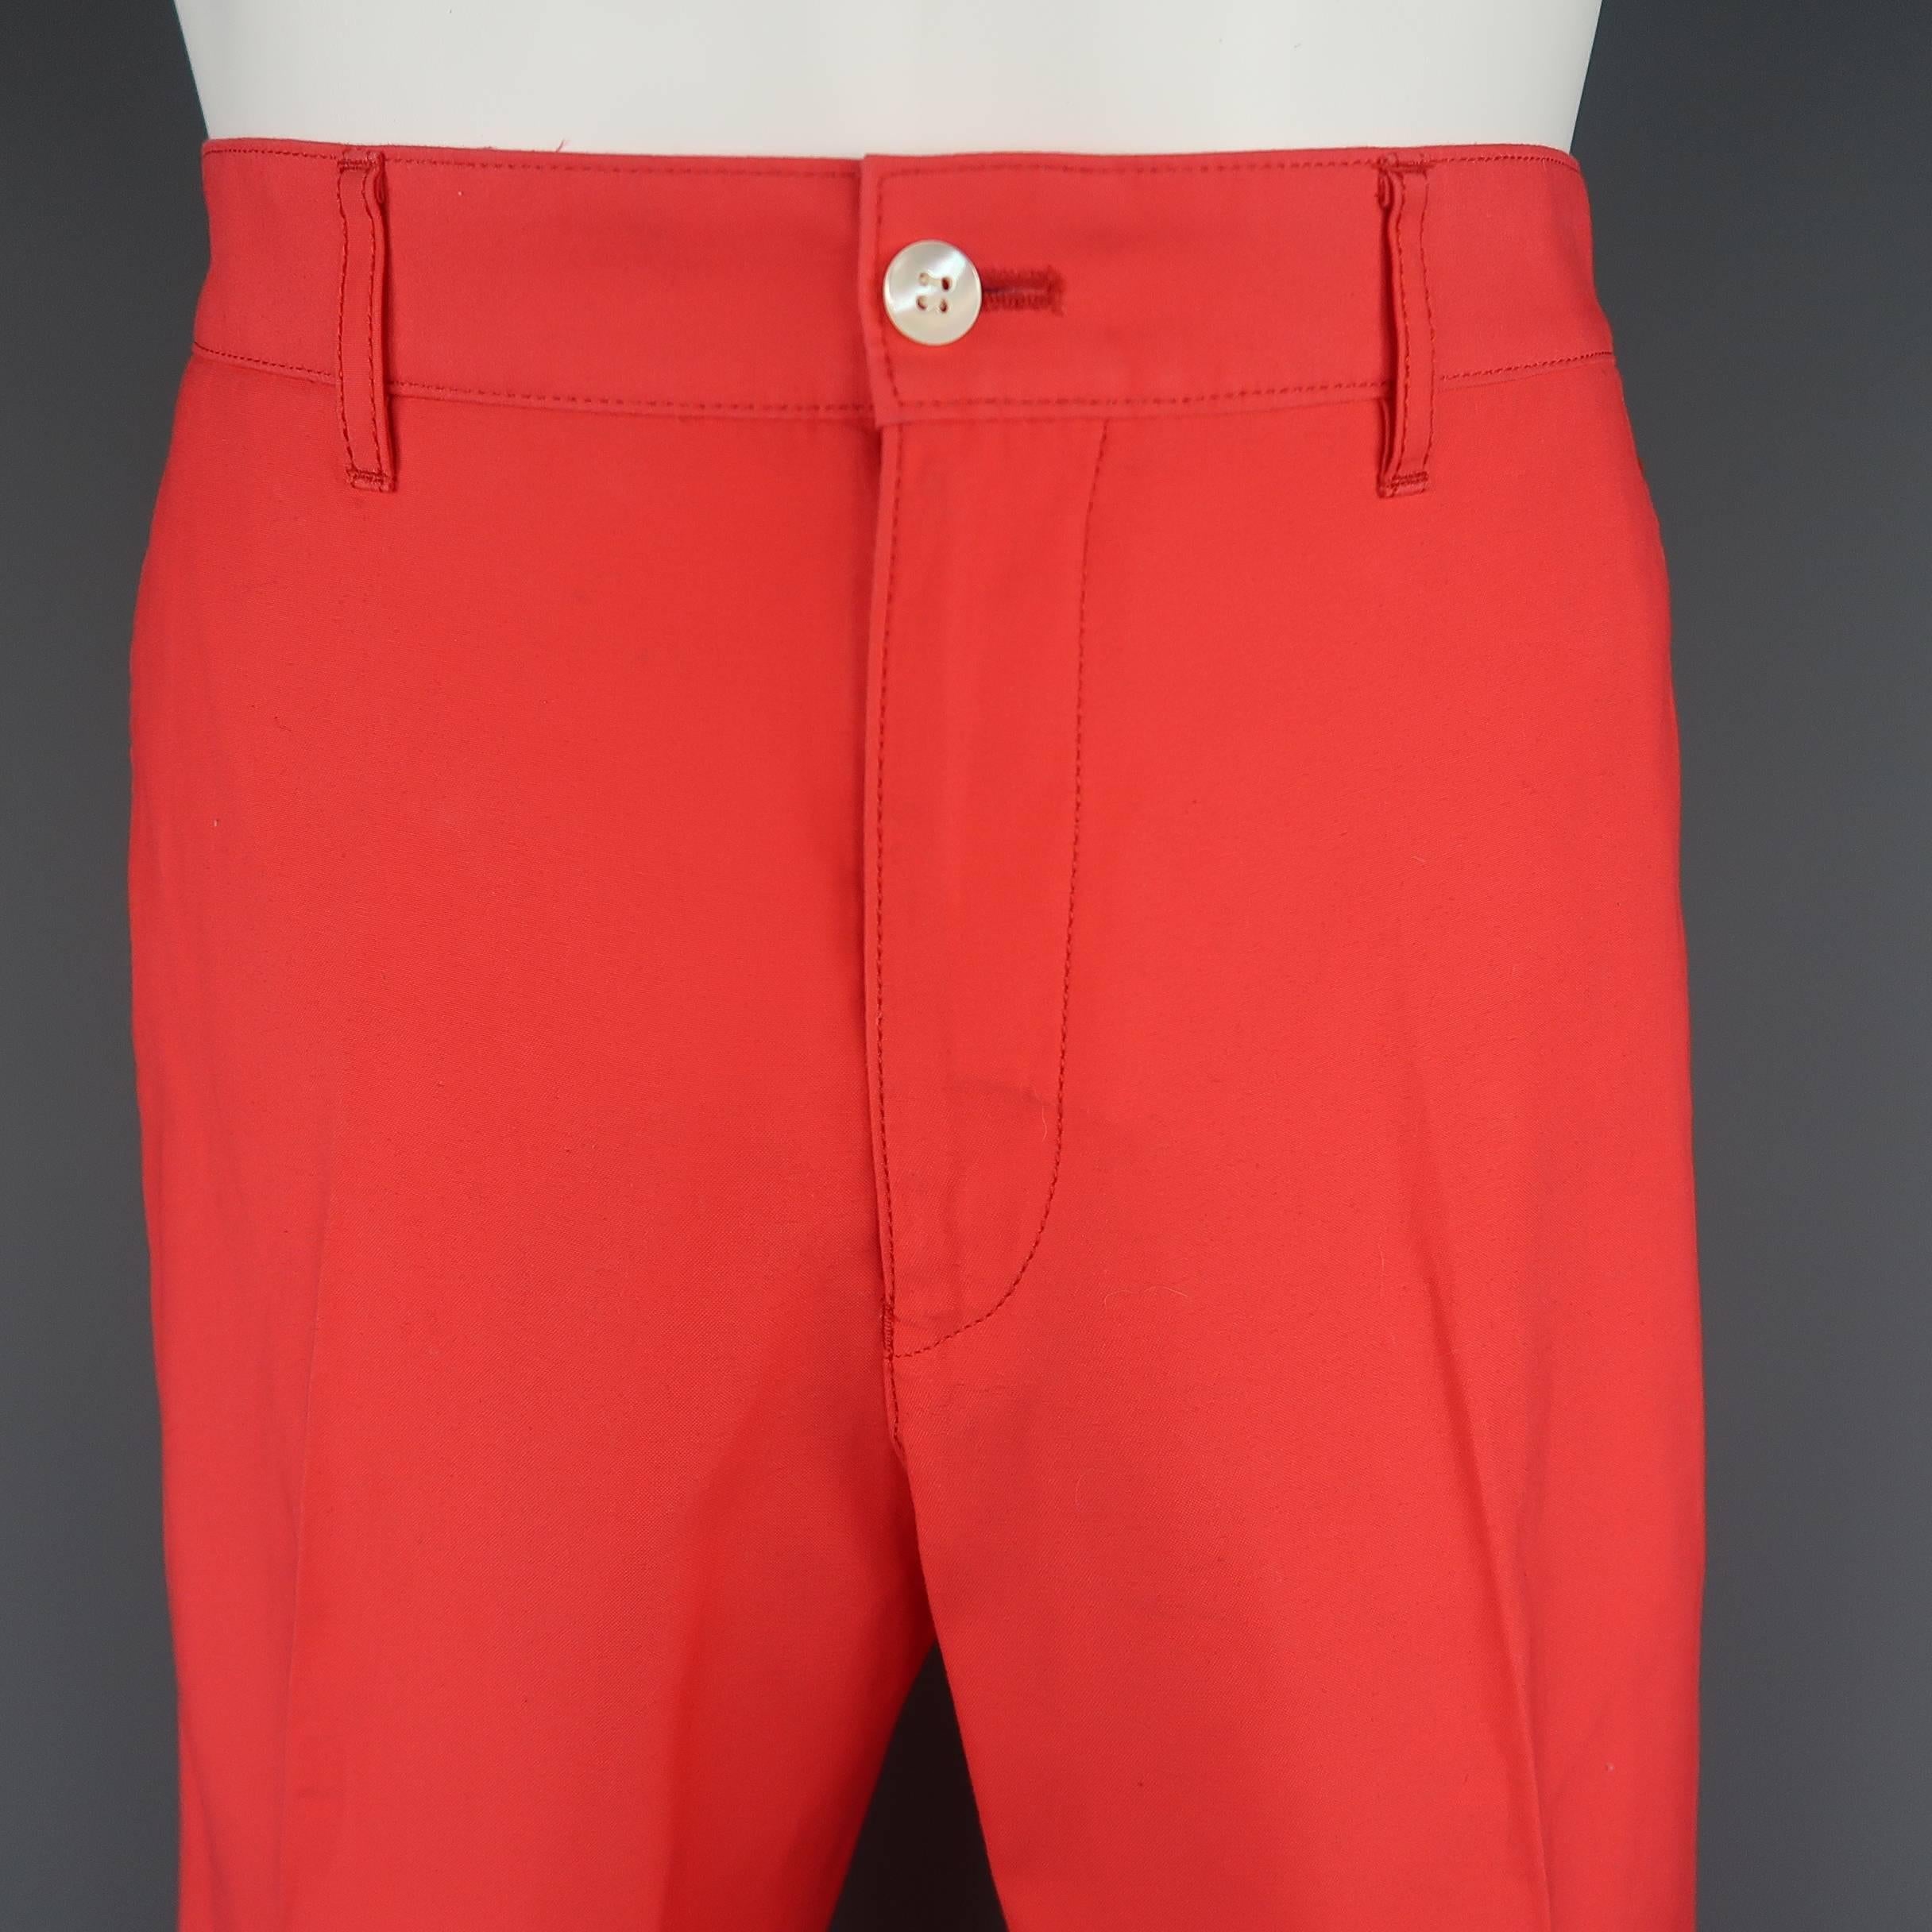 COMME des GARCONS HOMME PLUS chinos come in a bright coral pink cotton canvas with a zip fly and plaid waistband liner. S[ring 2012 Collection. Made in Japan.
 
Excellent Pre-Owned Condition.
Marked: L (AD 2012
 
Measurements:
 
Waist: 34 in.
Rise: